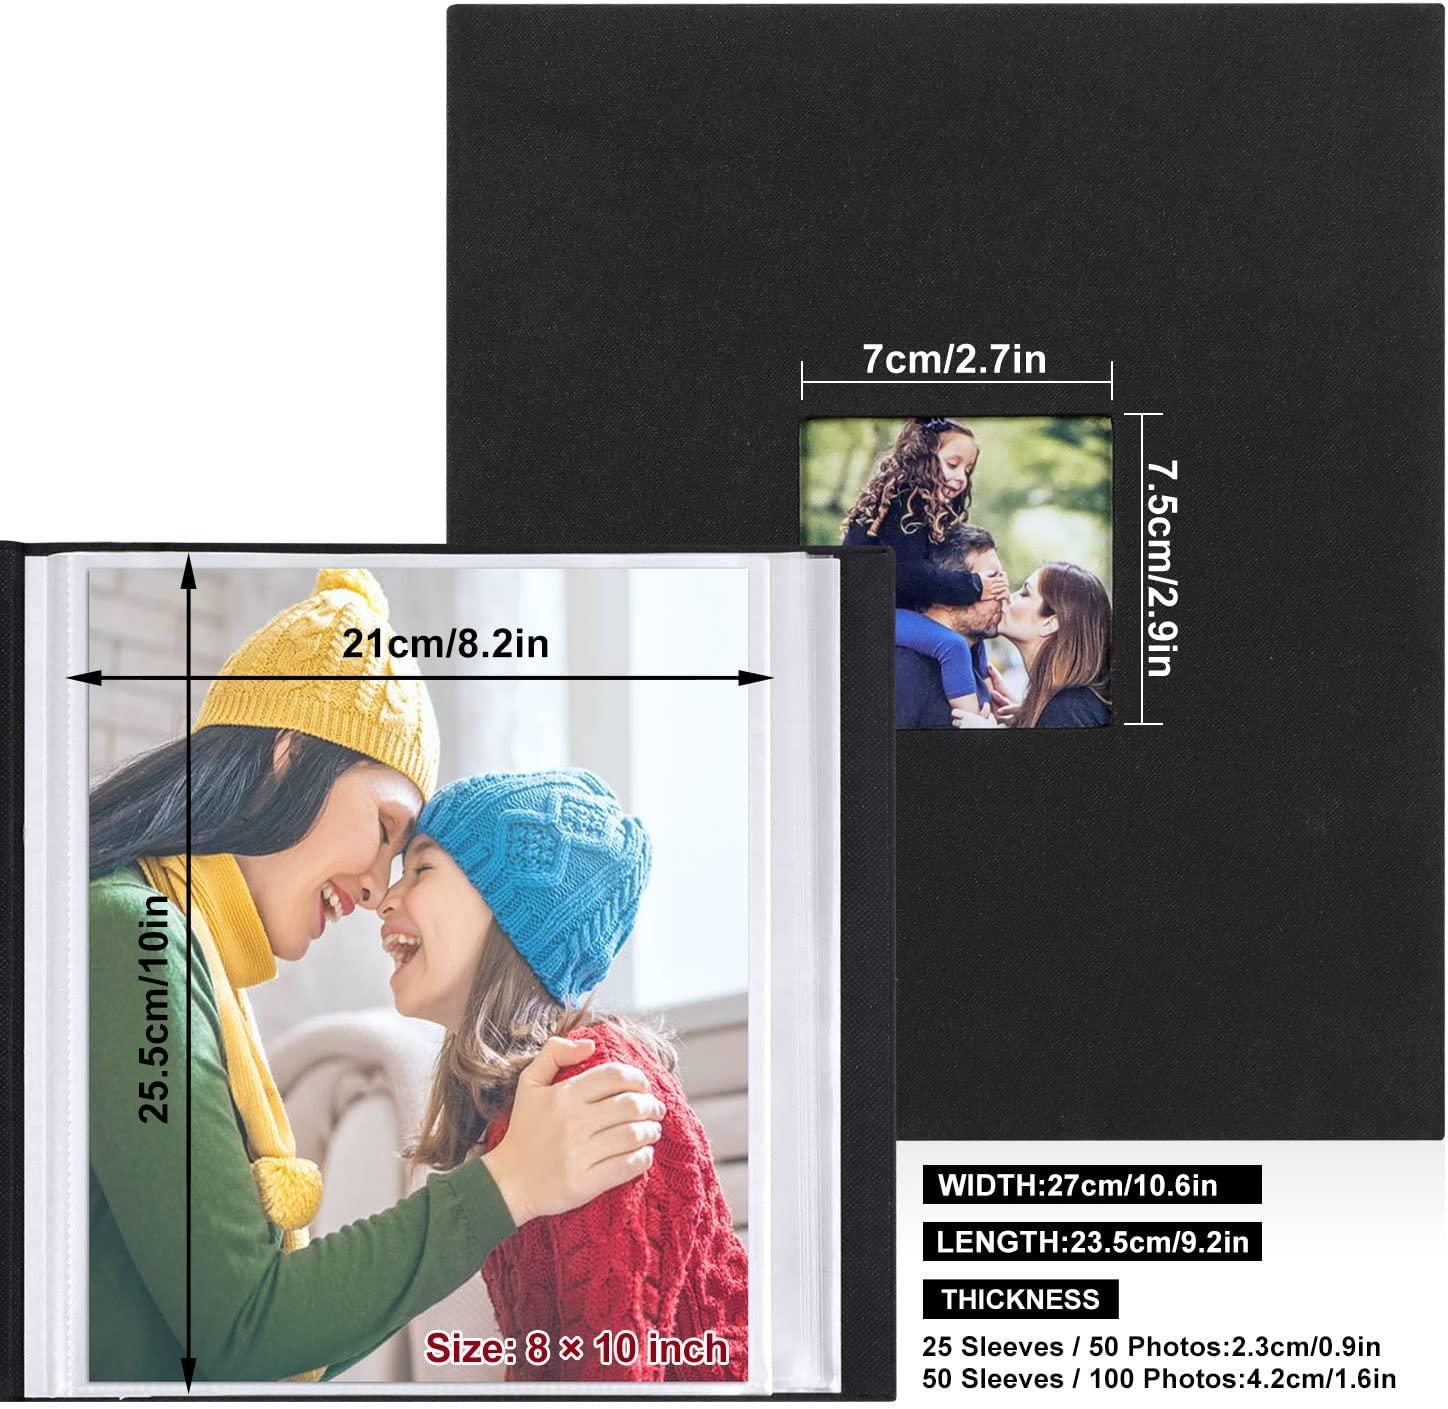 Lanpn Photo Album 8x10 50 Pockets, Small Capacity Linen Cover Acid Free  Slip Slide in Photo Albums Holds 50 Top Load Vertical Only 8x10 Pictures  (Black) 50 Pockets/1PK Black